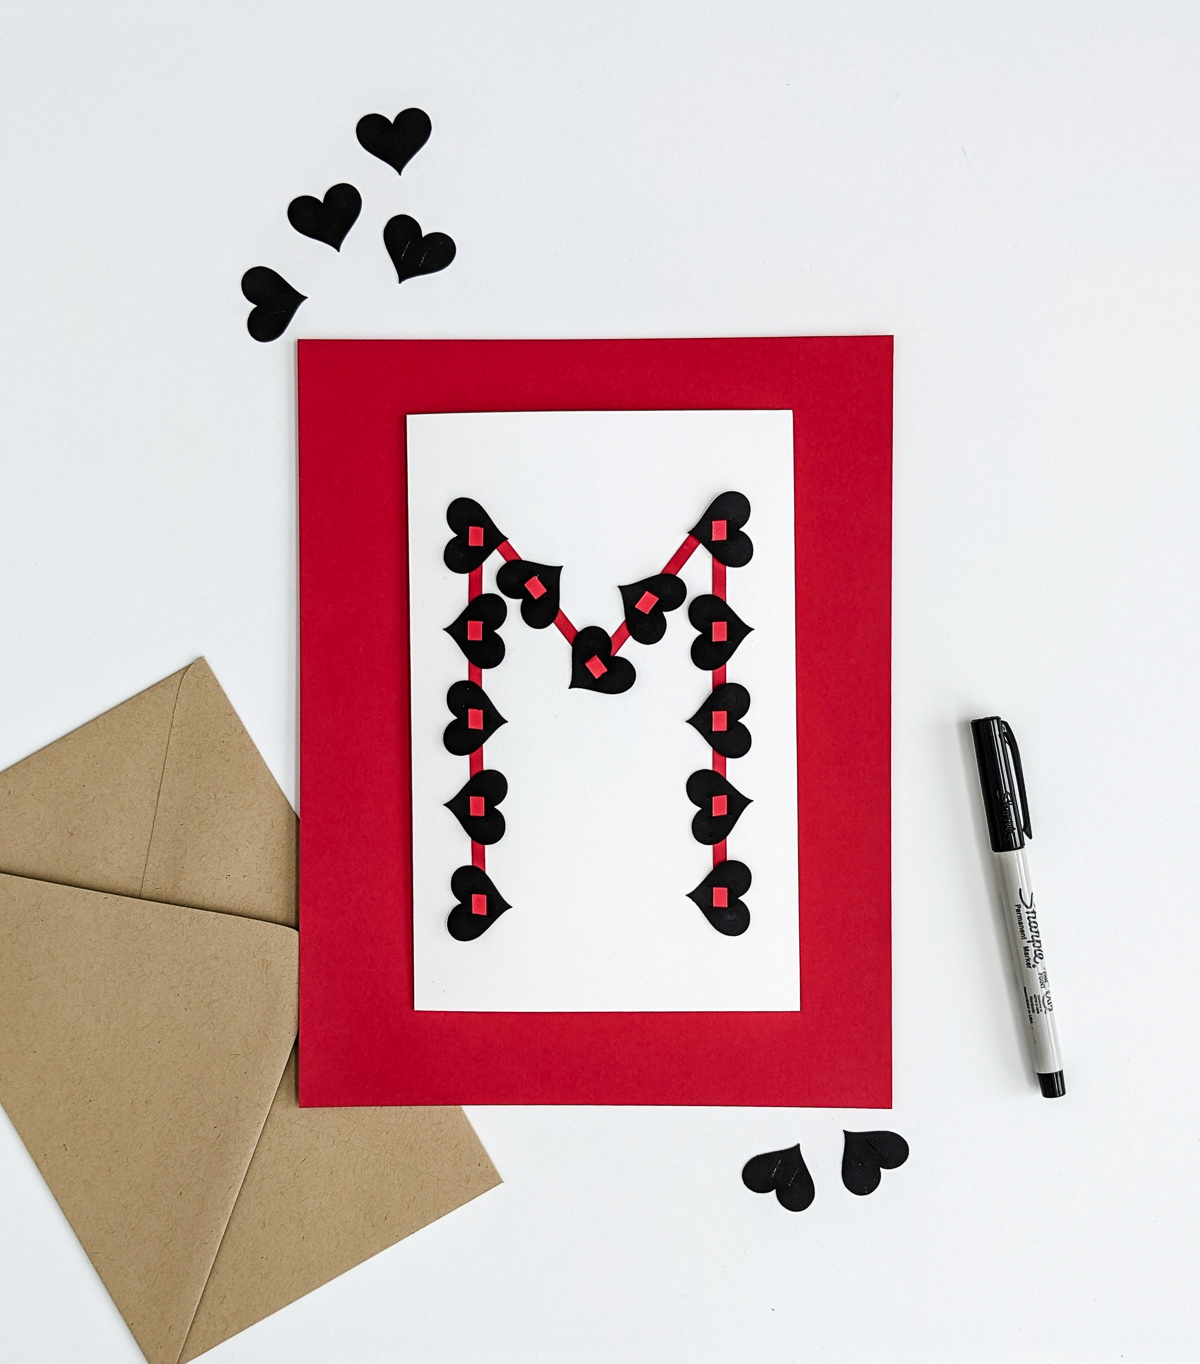 4 Simple Fun Fold Cards to Make for Valentine's Day